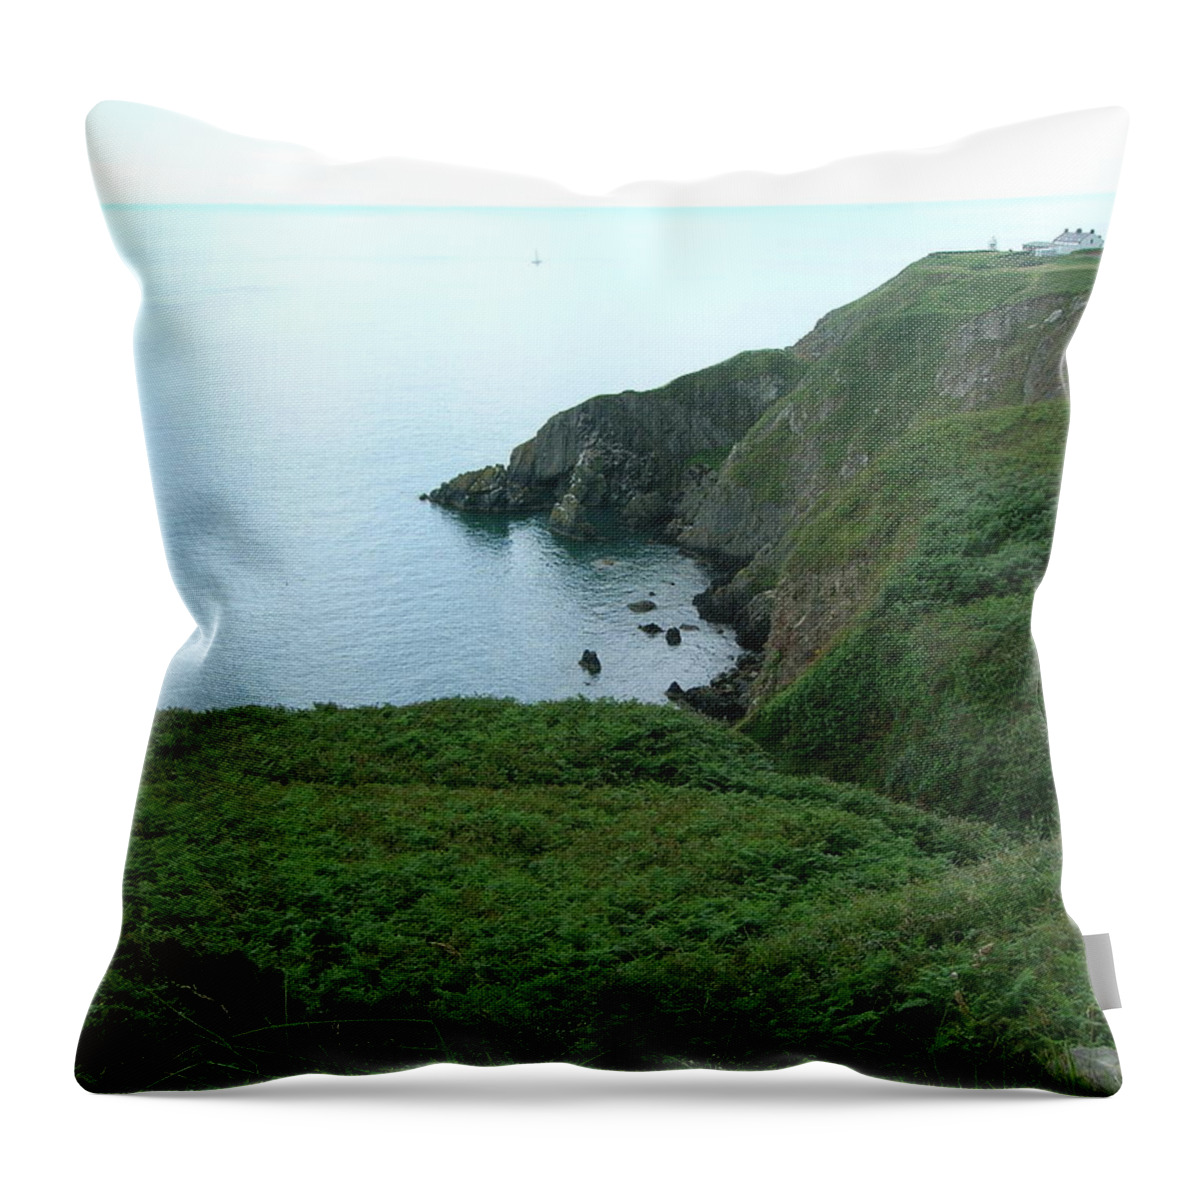 Moor Throw Pillow featuring the photograph The Moor by Tiziana Verso